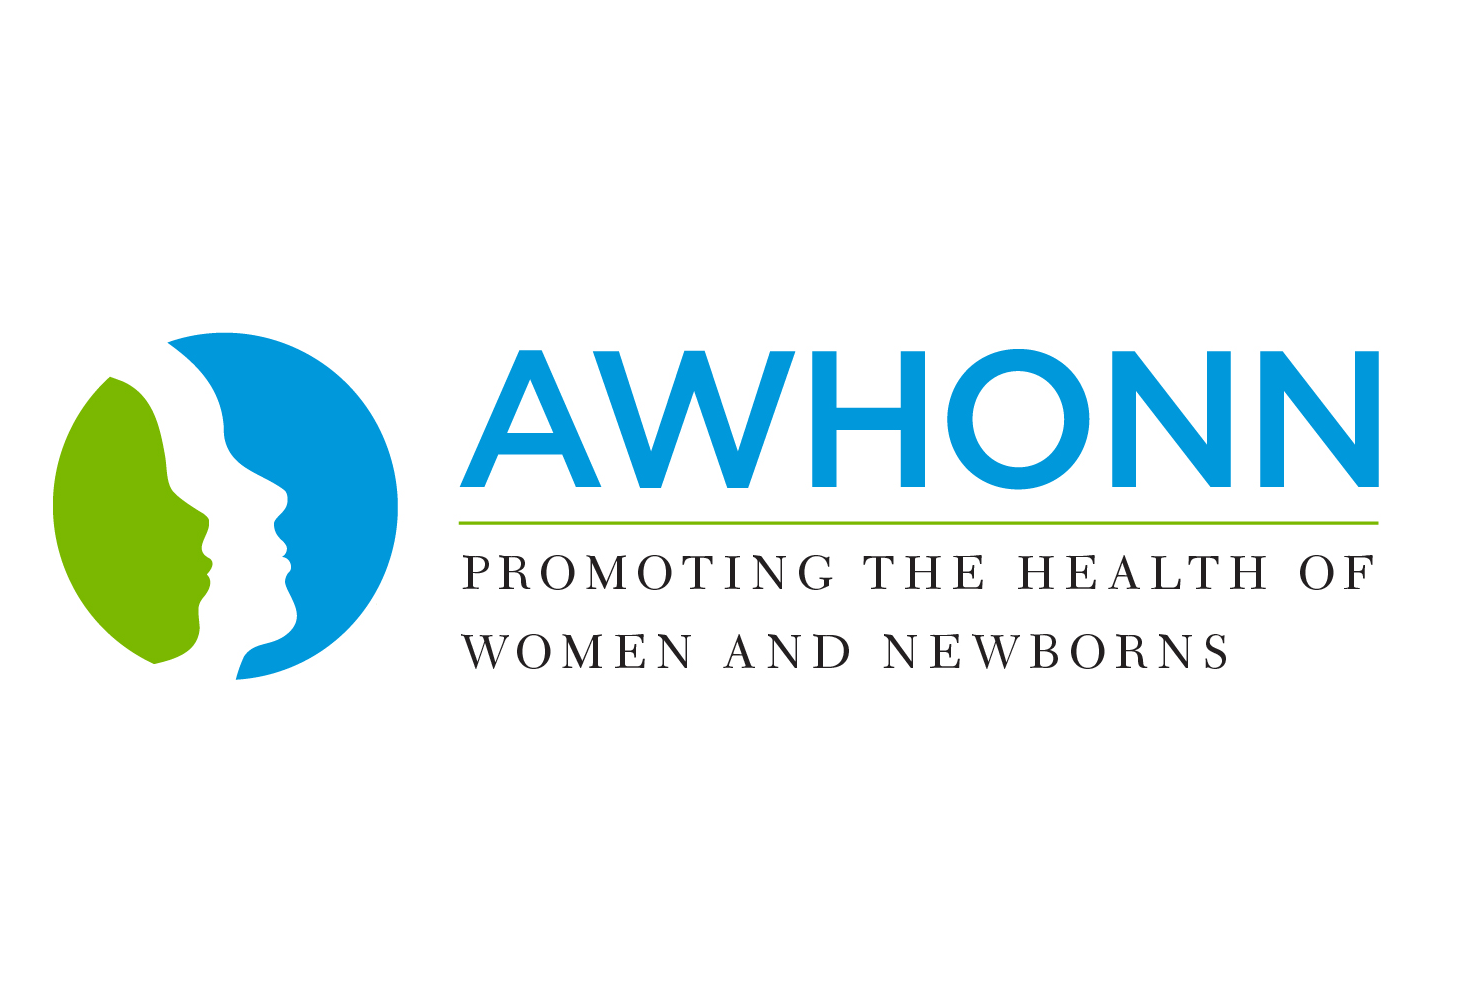 AWHONN promoting the health of women and newborns